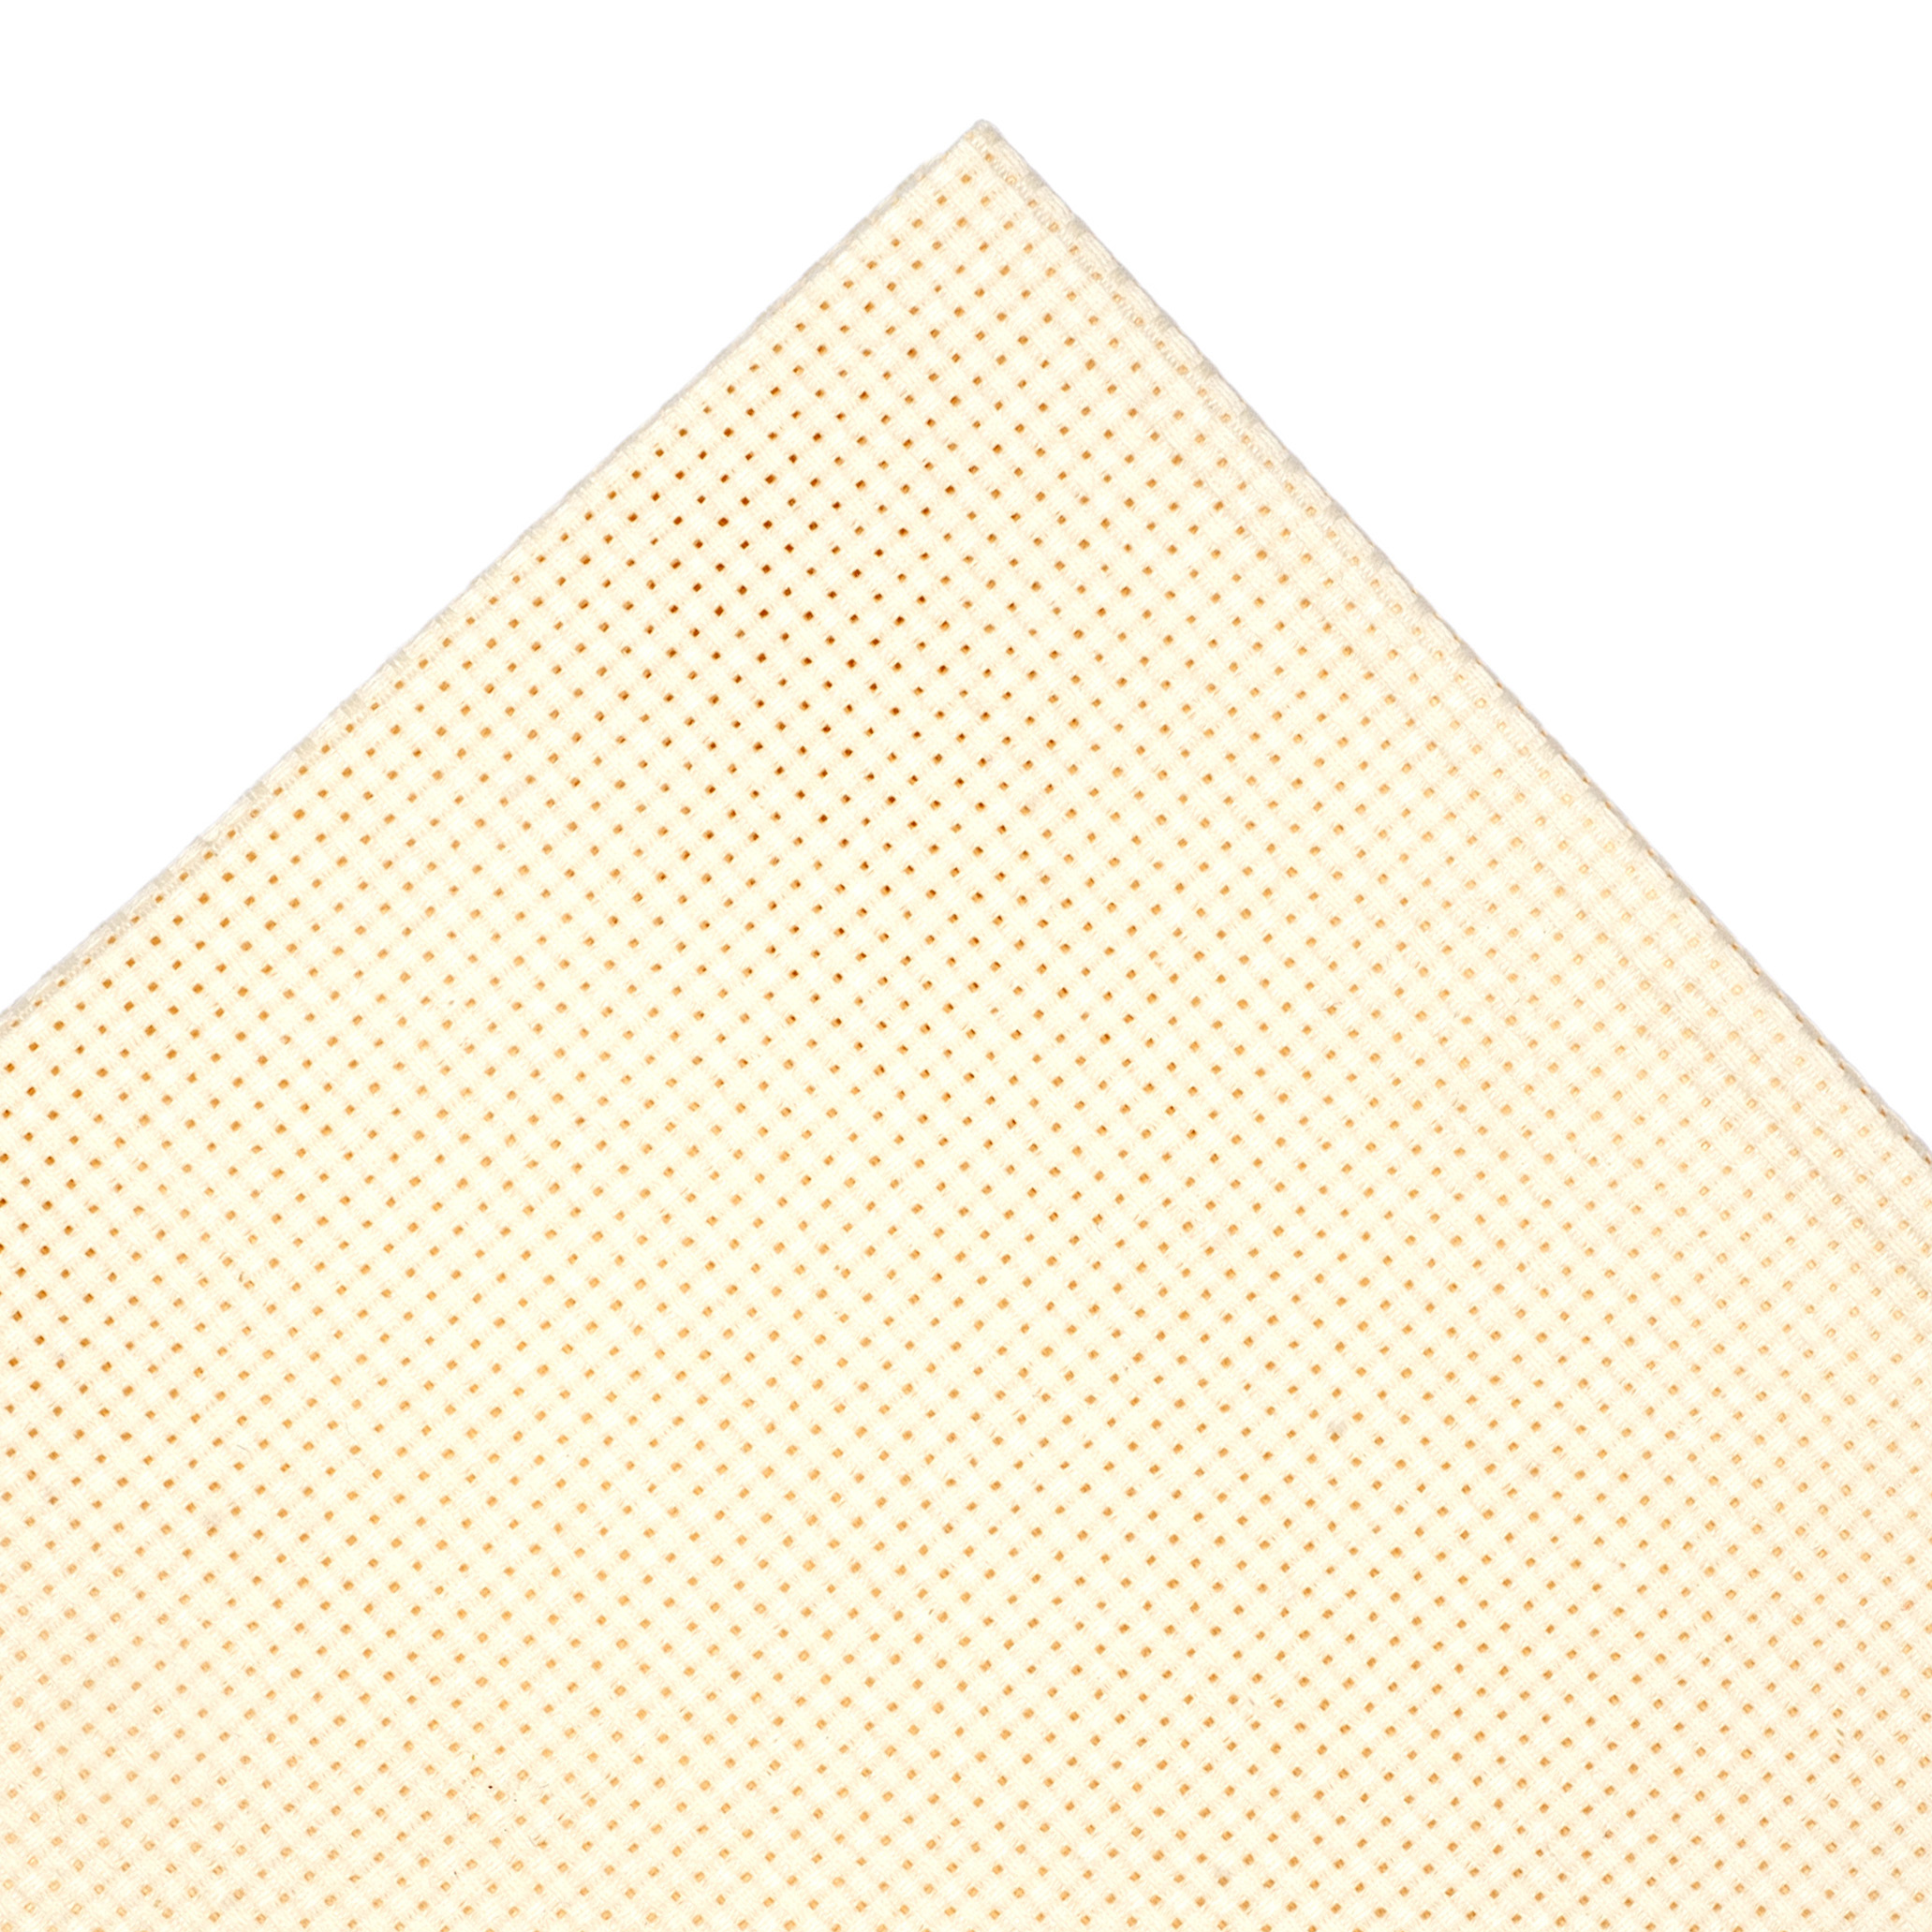 Aida Fabric 14 Count Cream 75cm Wide by Trimmits